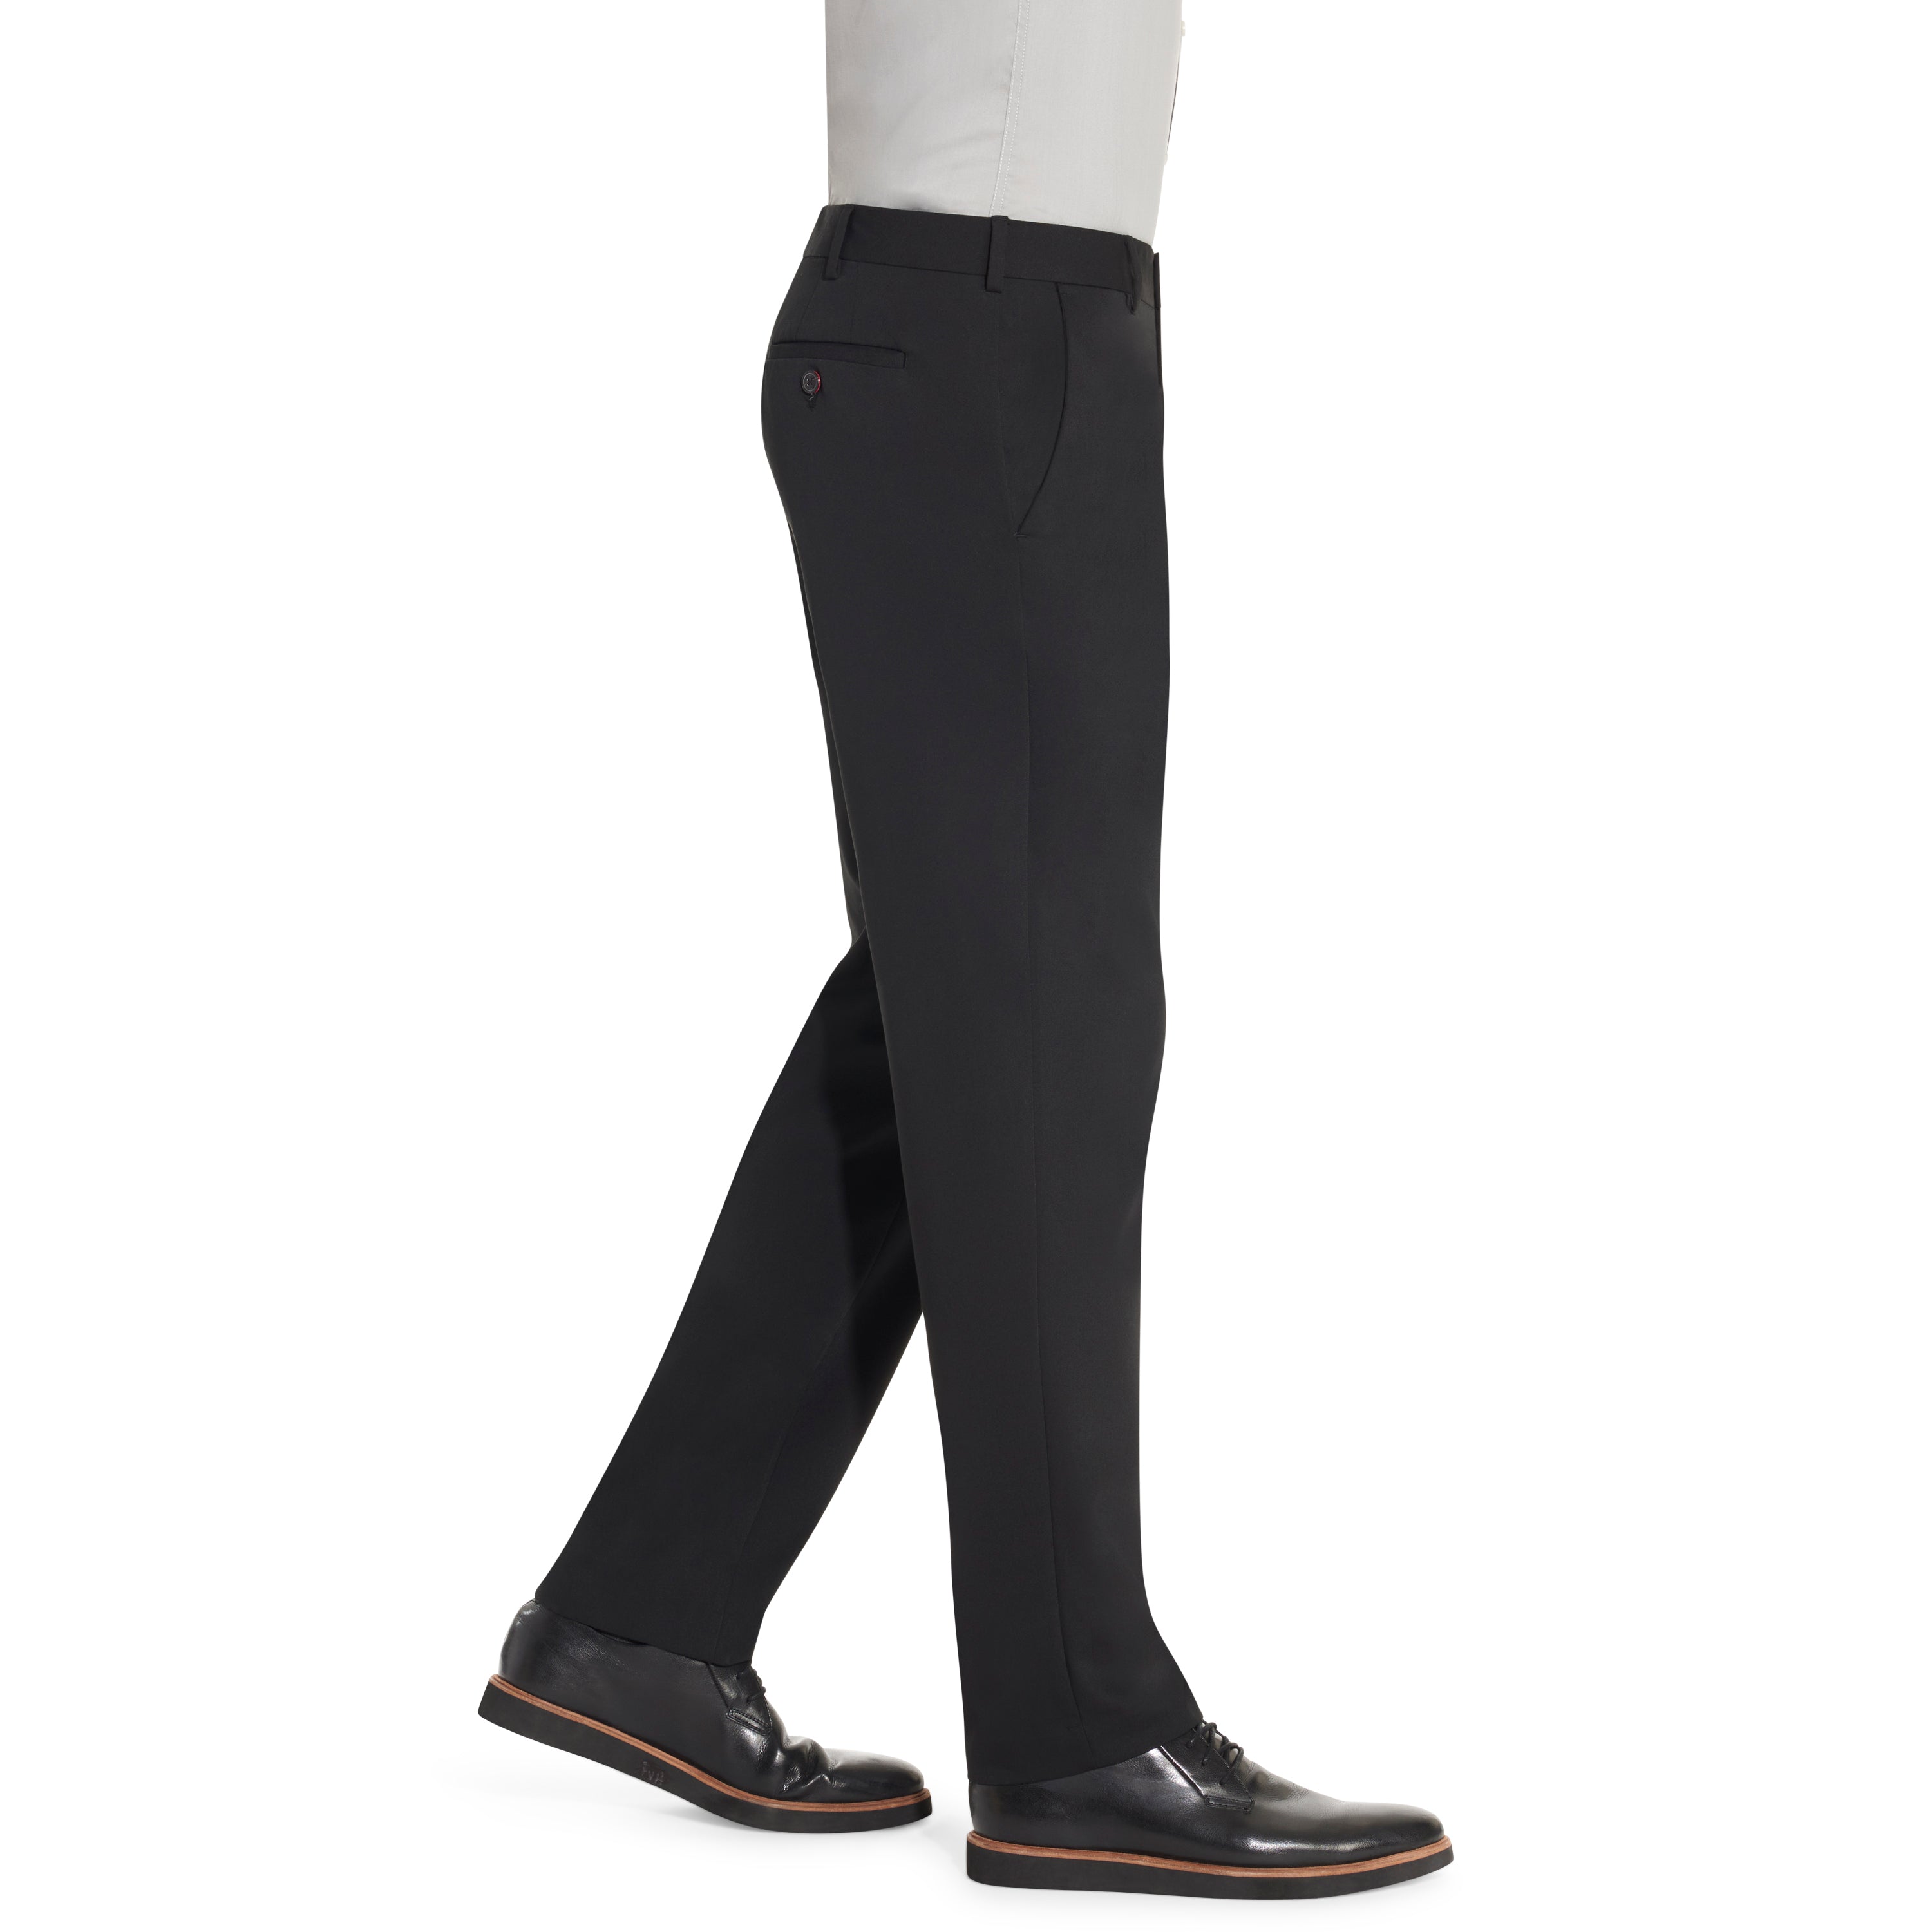 Louis Philippe Trousers & Chinos, Louis Philippe Black Wrinkle Free Trousers  for Men at Louisphilippe.com